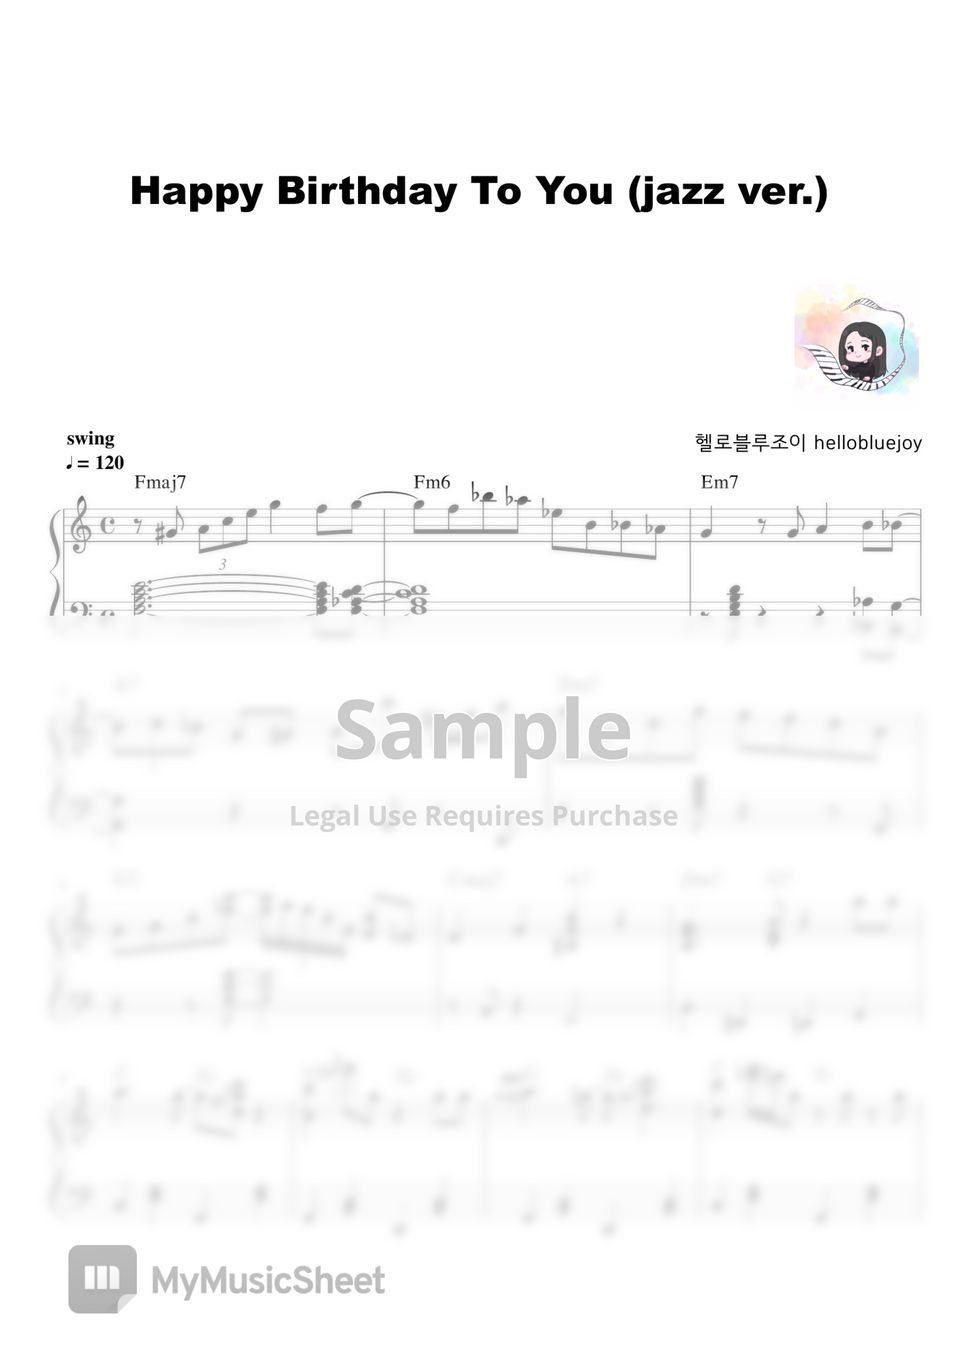 kid song - Happy Birthday To You (jazz ver.) by hellobluejoy